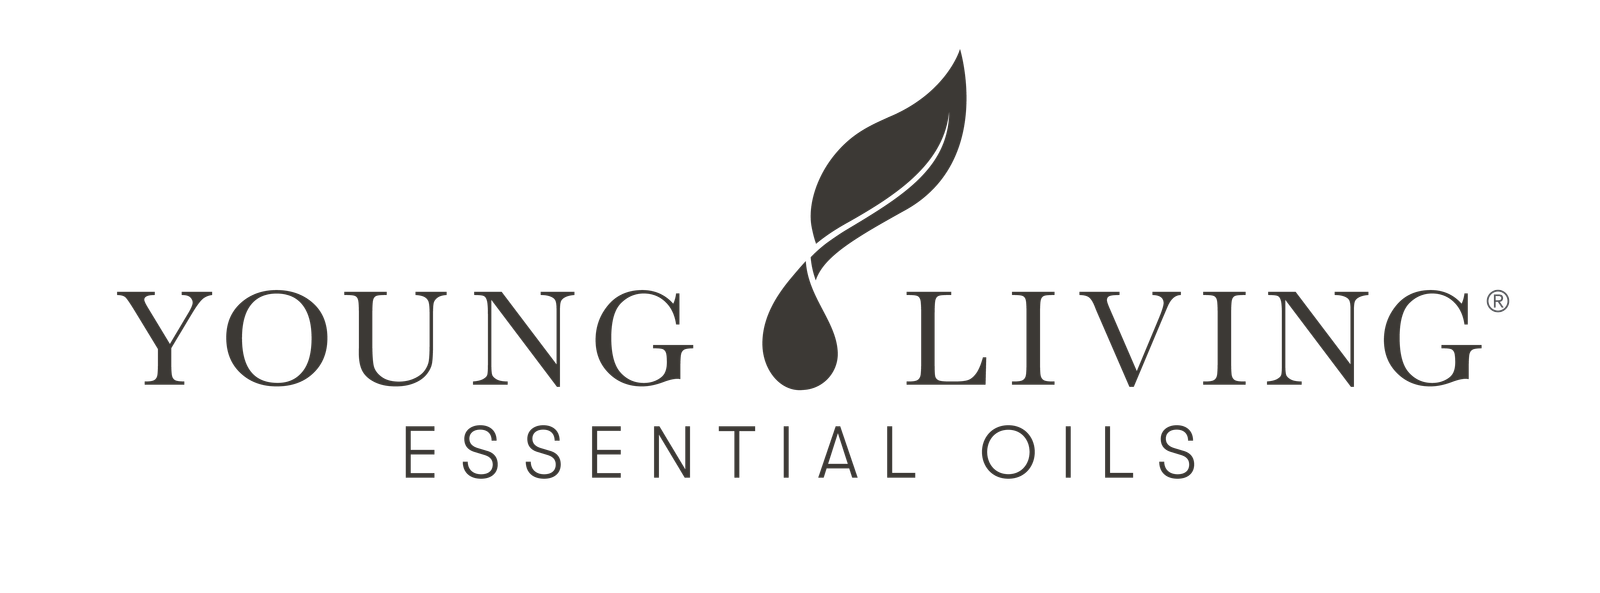 young-living-introduces-dr-je-tae-woo-as-head-of-apac-science